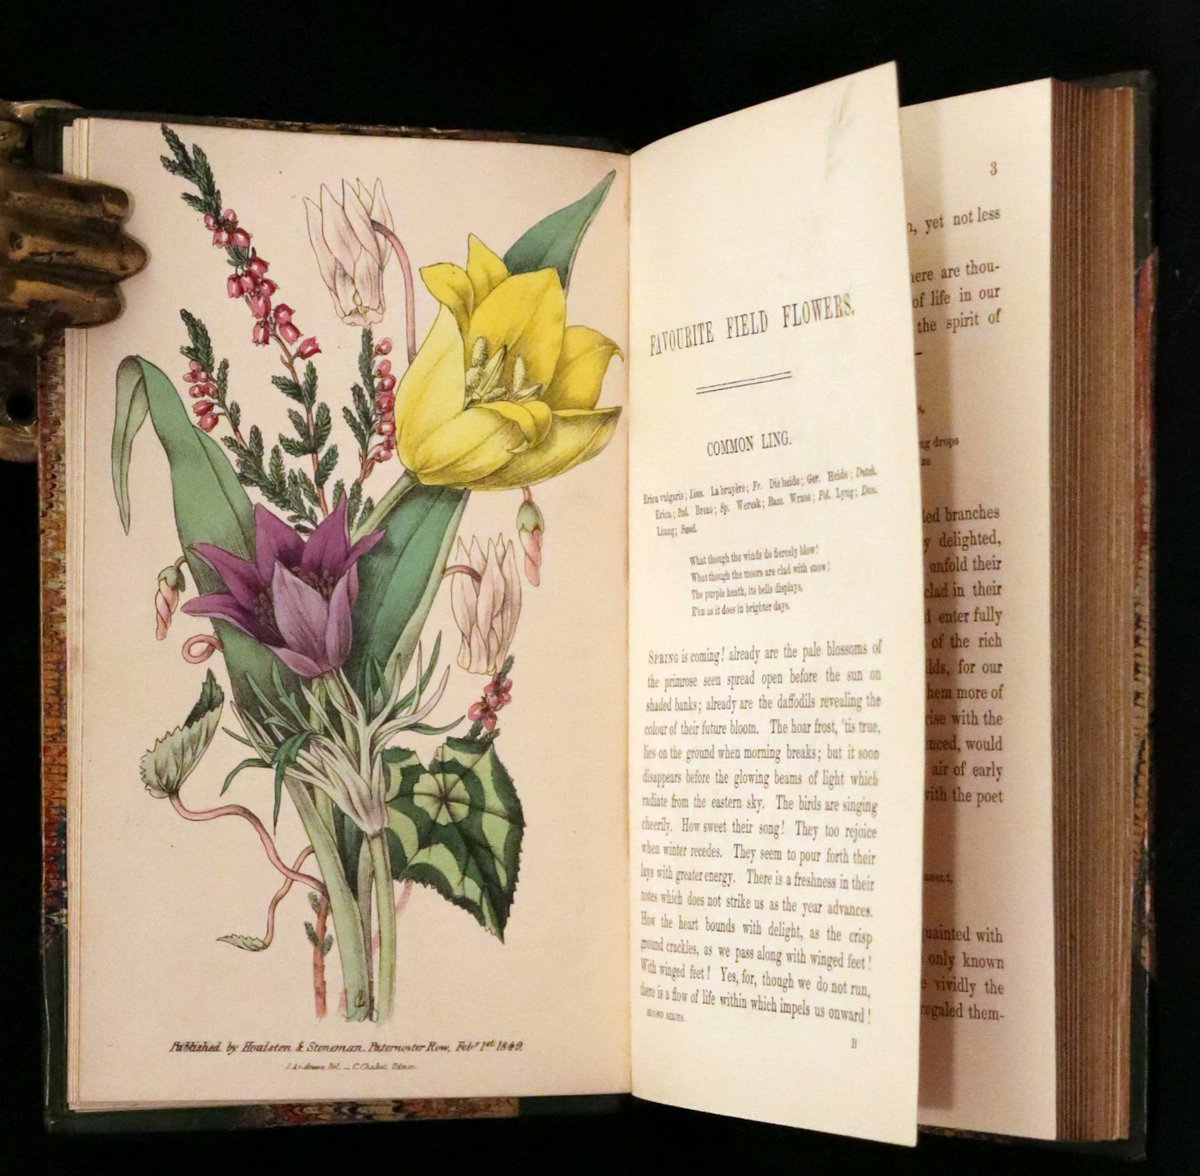 Explore the natural beauty of England with the 1848 first edition set of 'Favourite Field Flowers' by Robert Tyas.mflibra.com/products/1848-…
This rare collection celebrates the vibrant wildflowers of England, captured in exquisite detail.
#BookWithASoul #MFLIBRA #OwnAPieceOfHistory